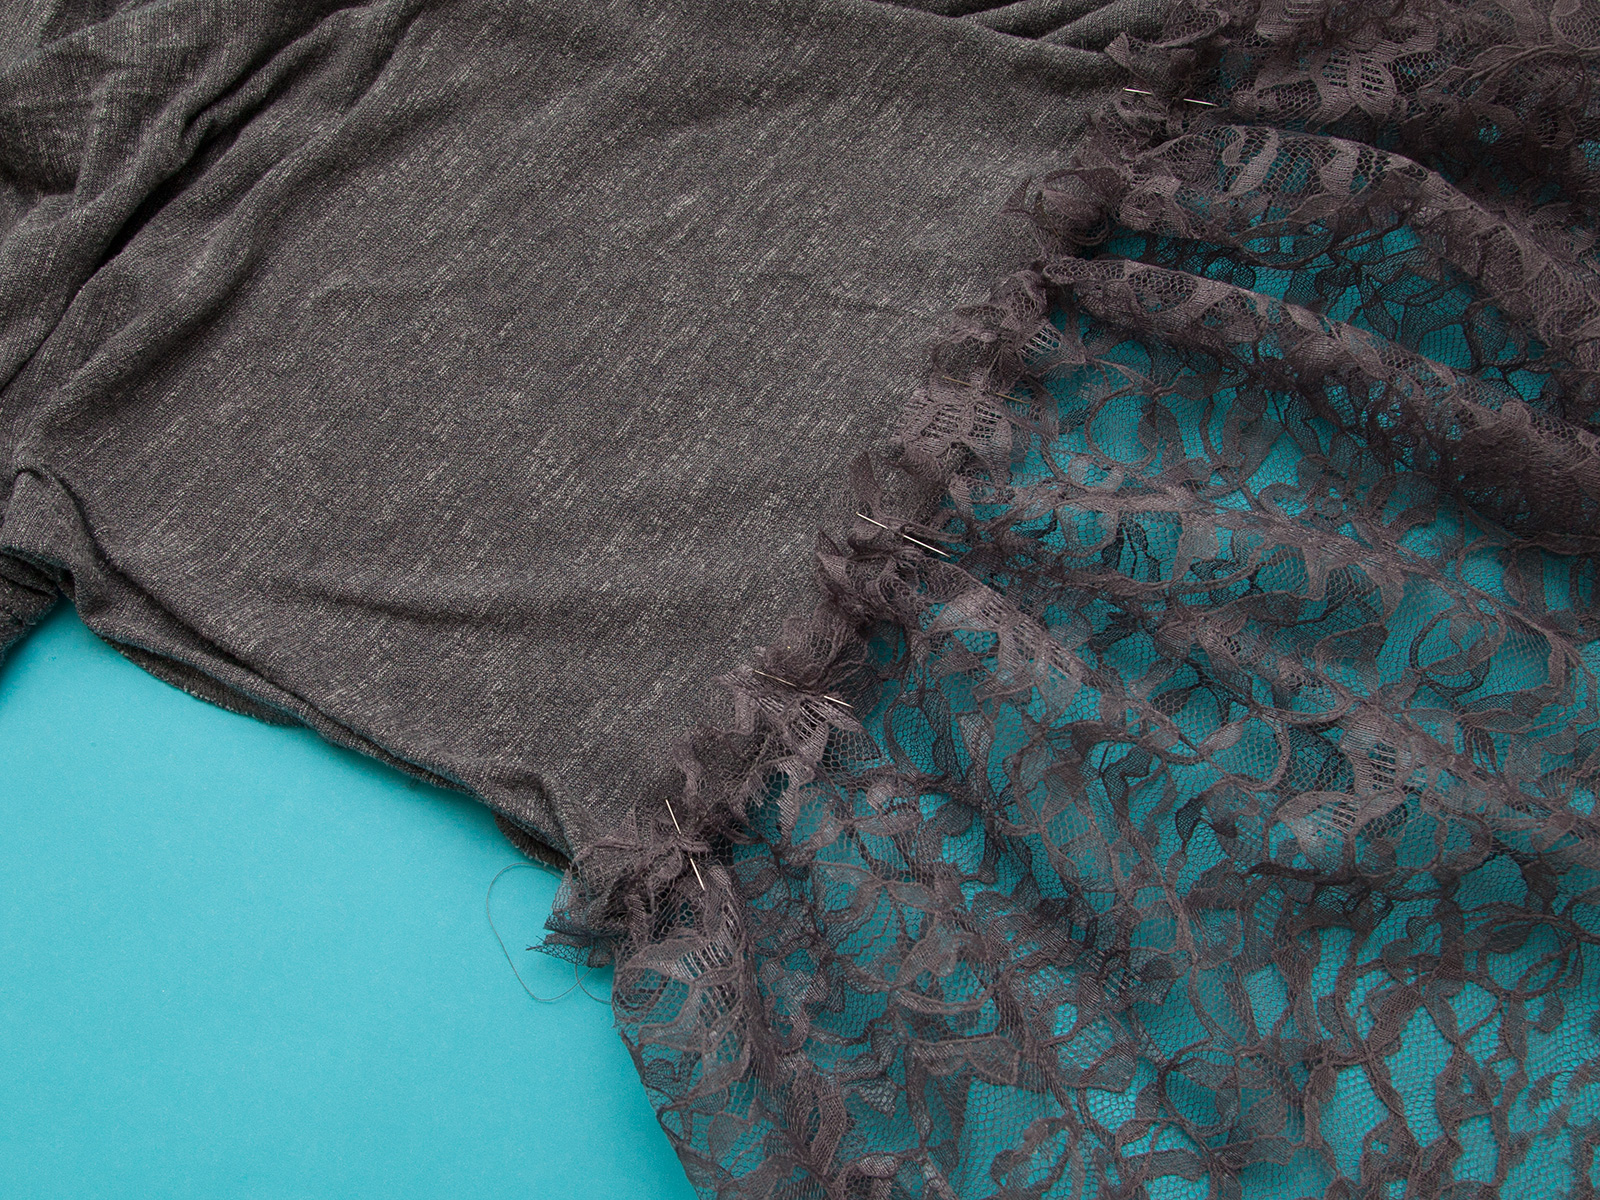 DIY Lace Edged T-Shirt pin to tee by Trinkets in Bloom